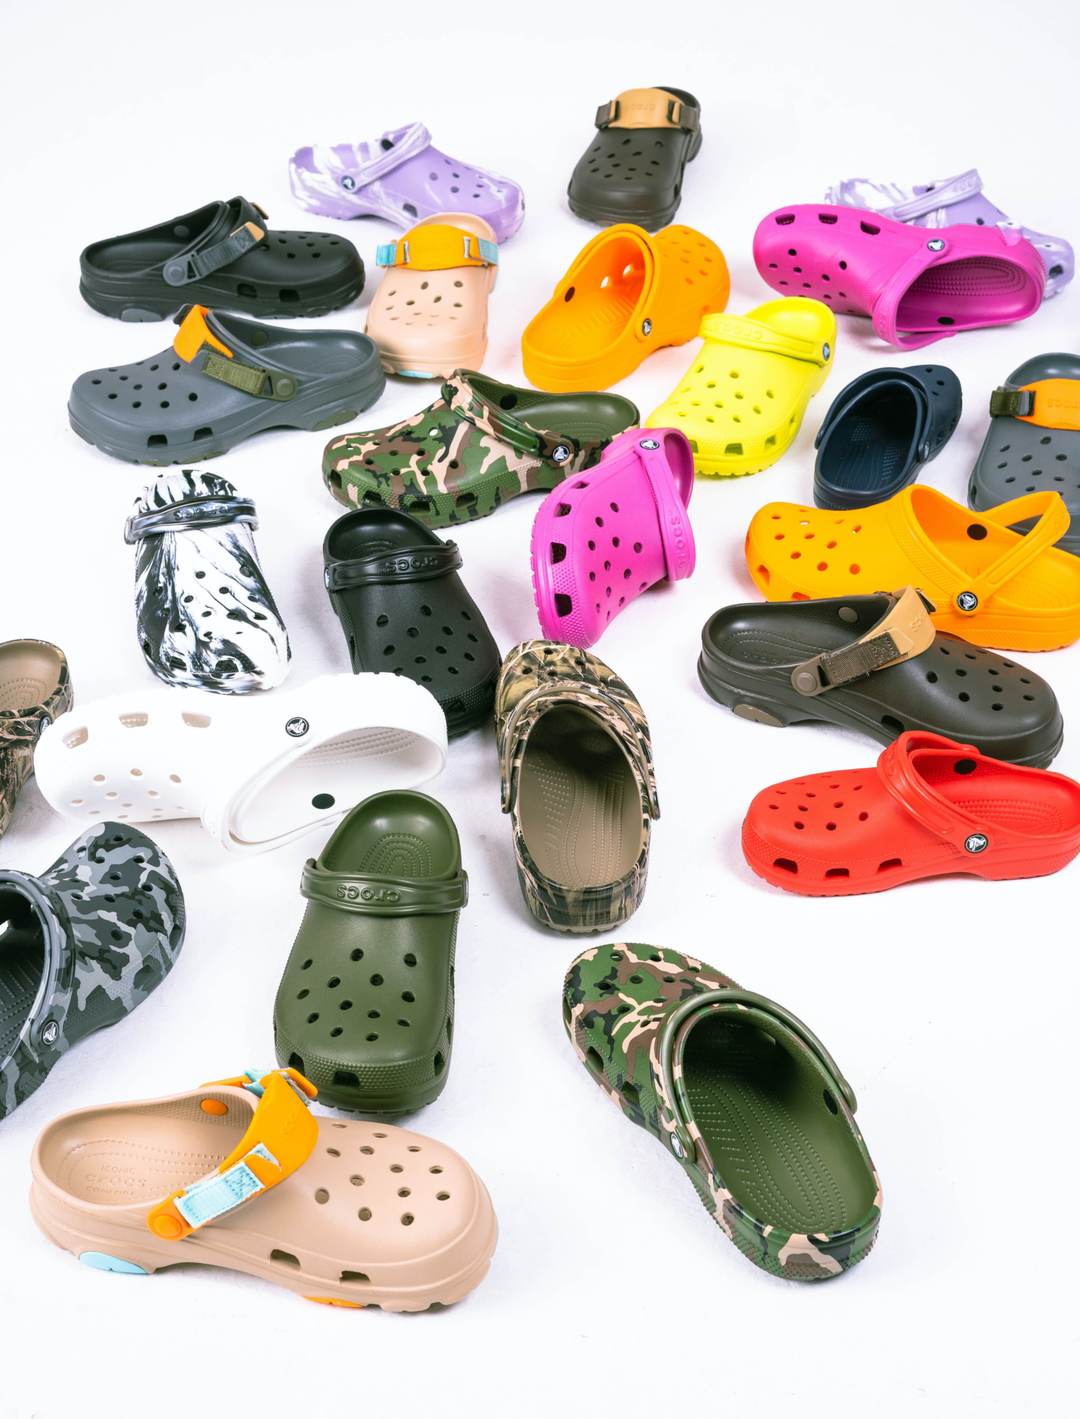 Crocs: The Sneaky Cool Shoes Everyone Seems to Love